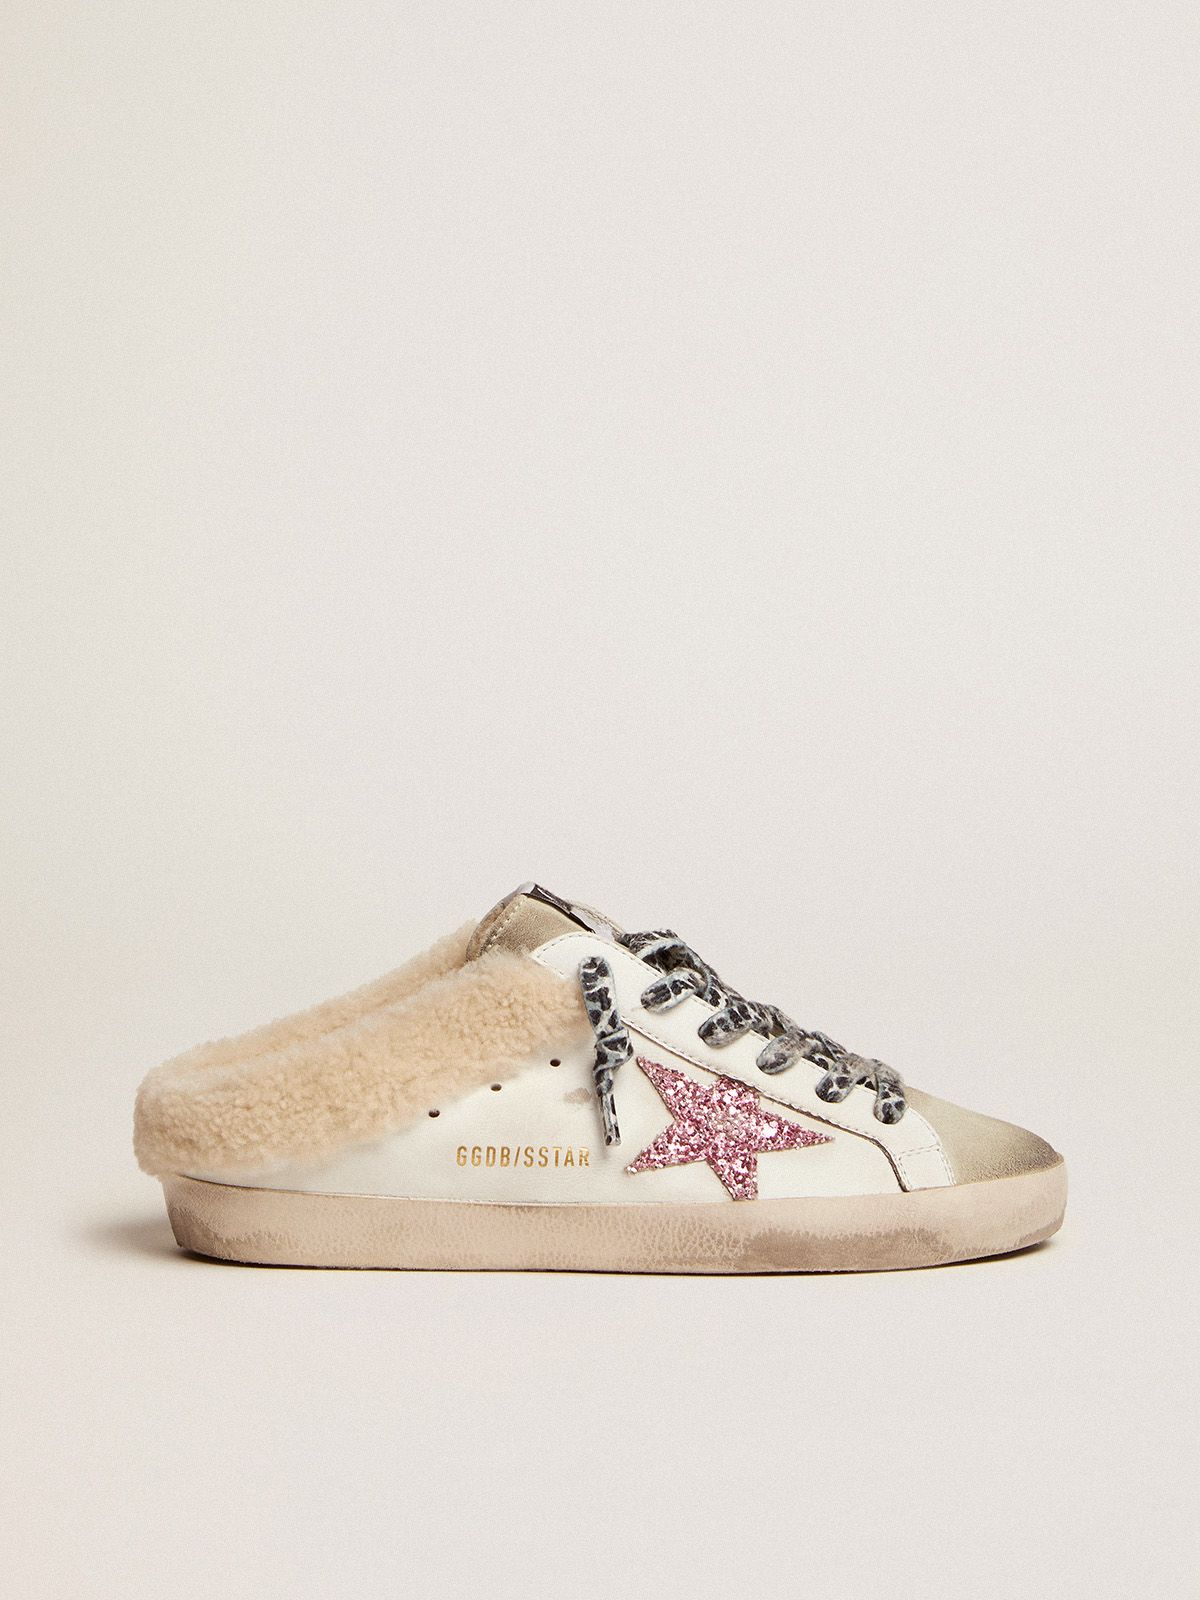 golden goose star shearling pink Sabots with lining Super-Star and glitter